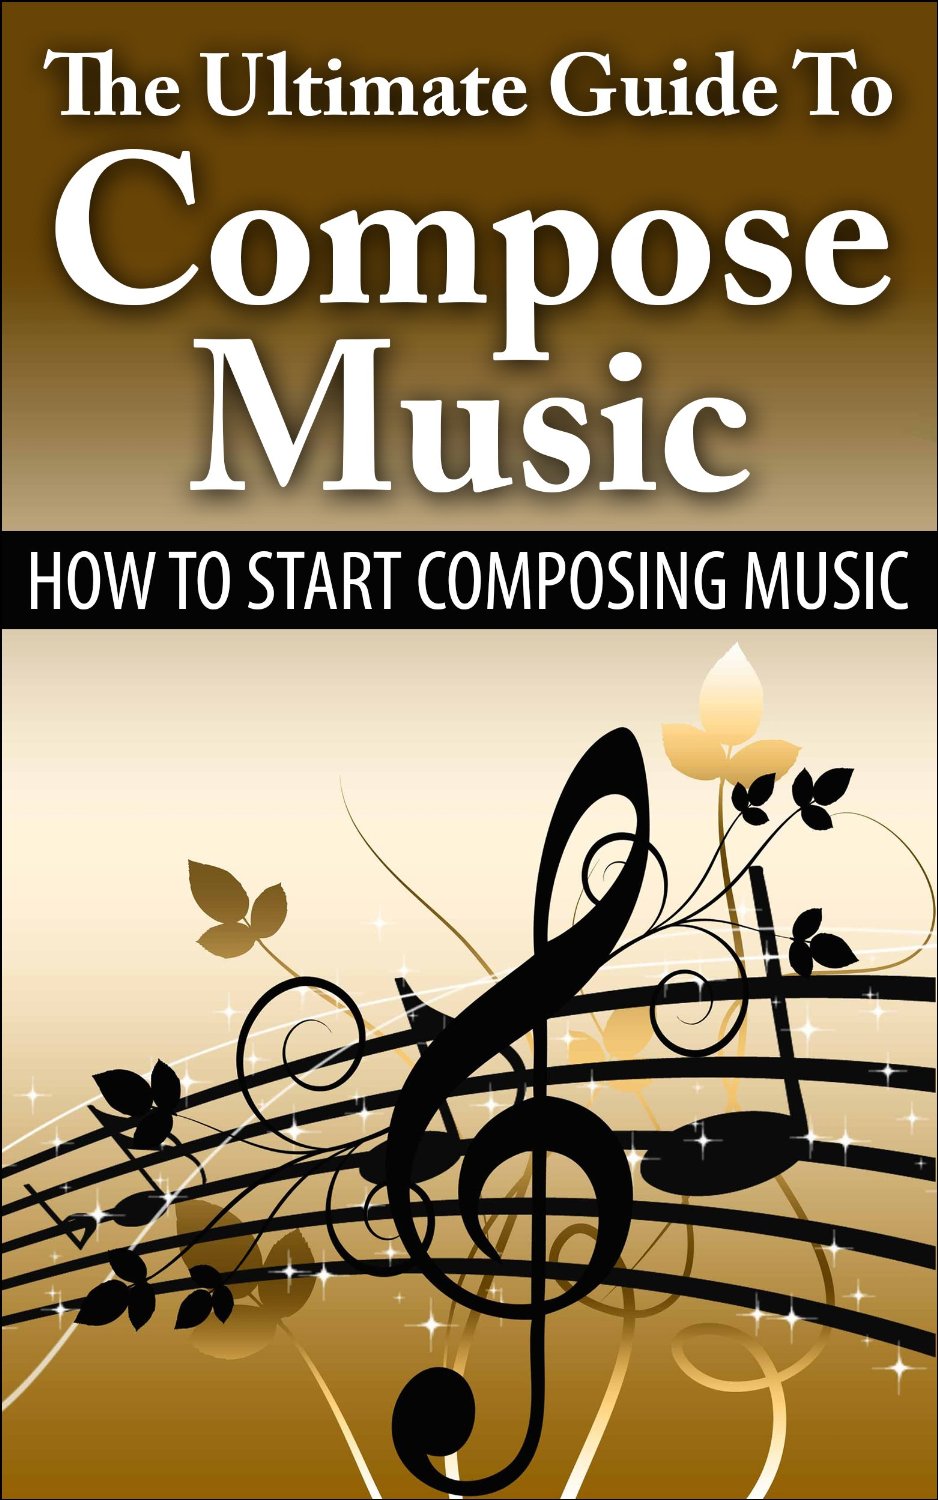 The Ultimate Guide To Compose Music: How To Start Composing Music by George K.